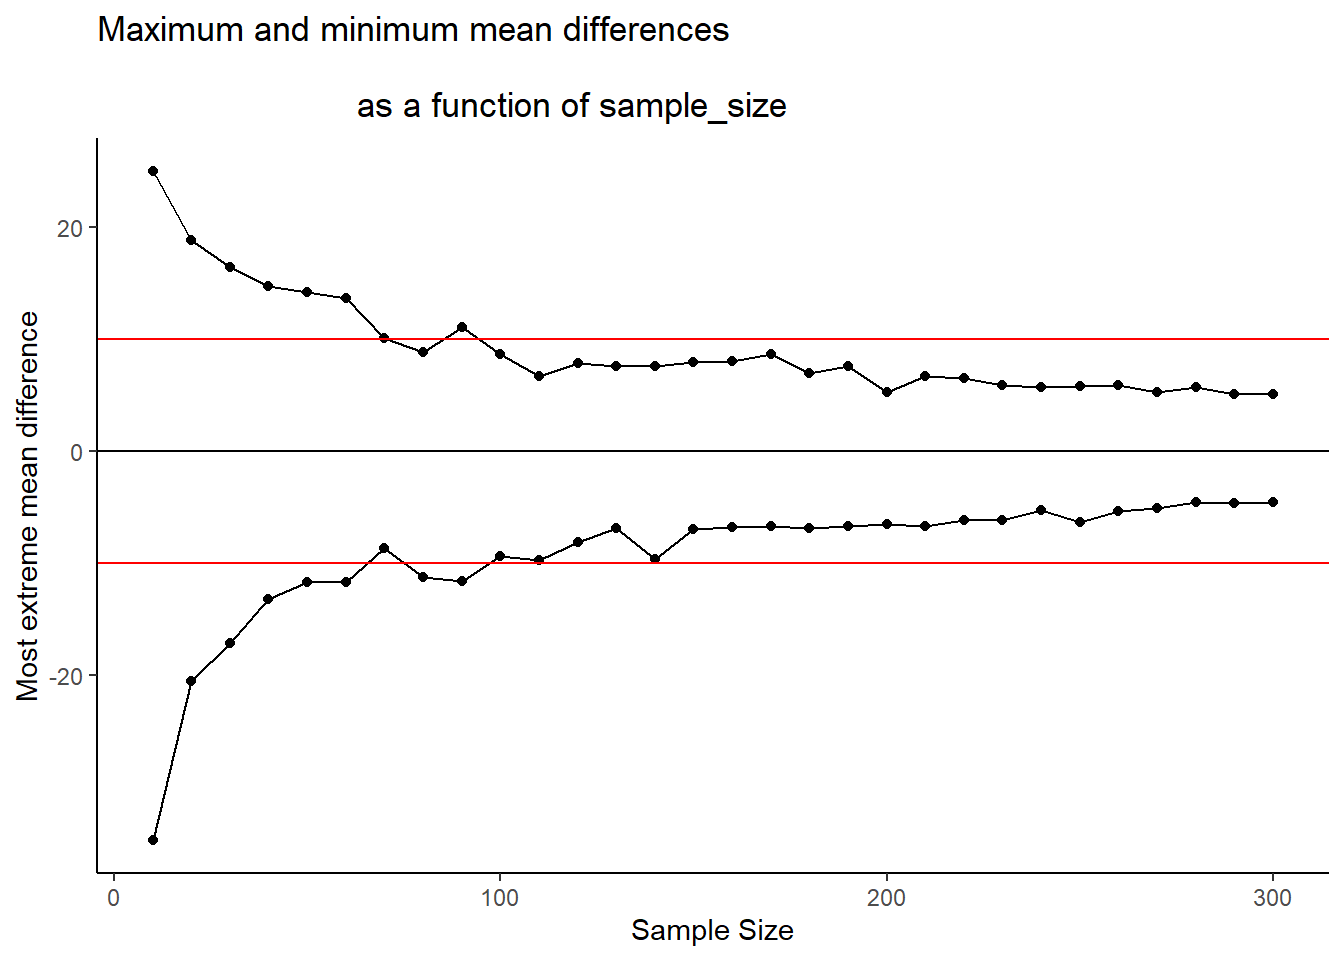 The red line represents the size of a mean difference that a researcher may be interested in detecting. All of the dots outside (above or below) the red line represent designs with small sample-sizes. When a difference of 10 occurs for these designs, we can rule out chance with confidence. The dots between the red lines represent designs with larger sample-sizes. These designs never produce differences as large as 10, so when those differences occur, we can be confident chance did not produce them